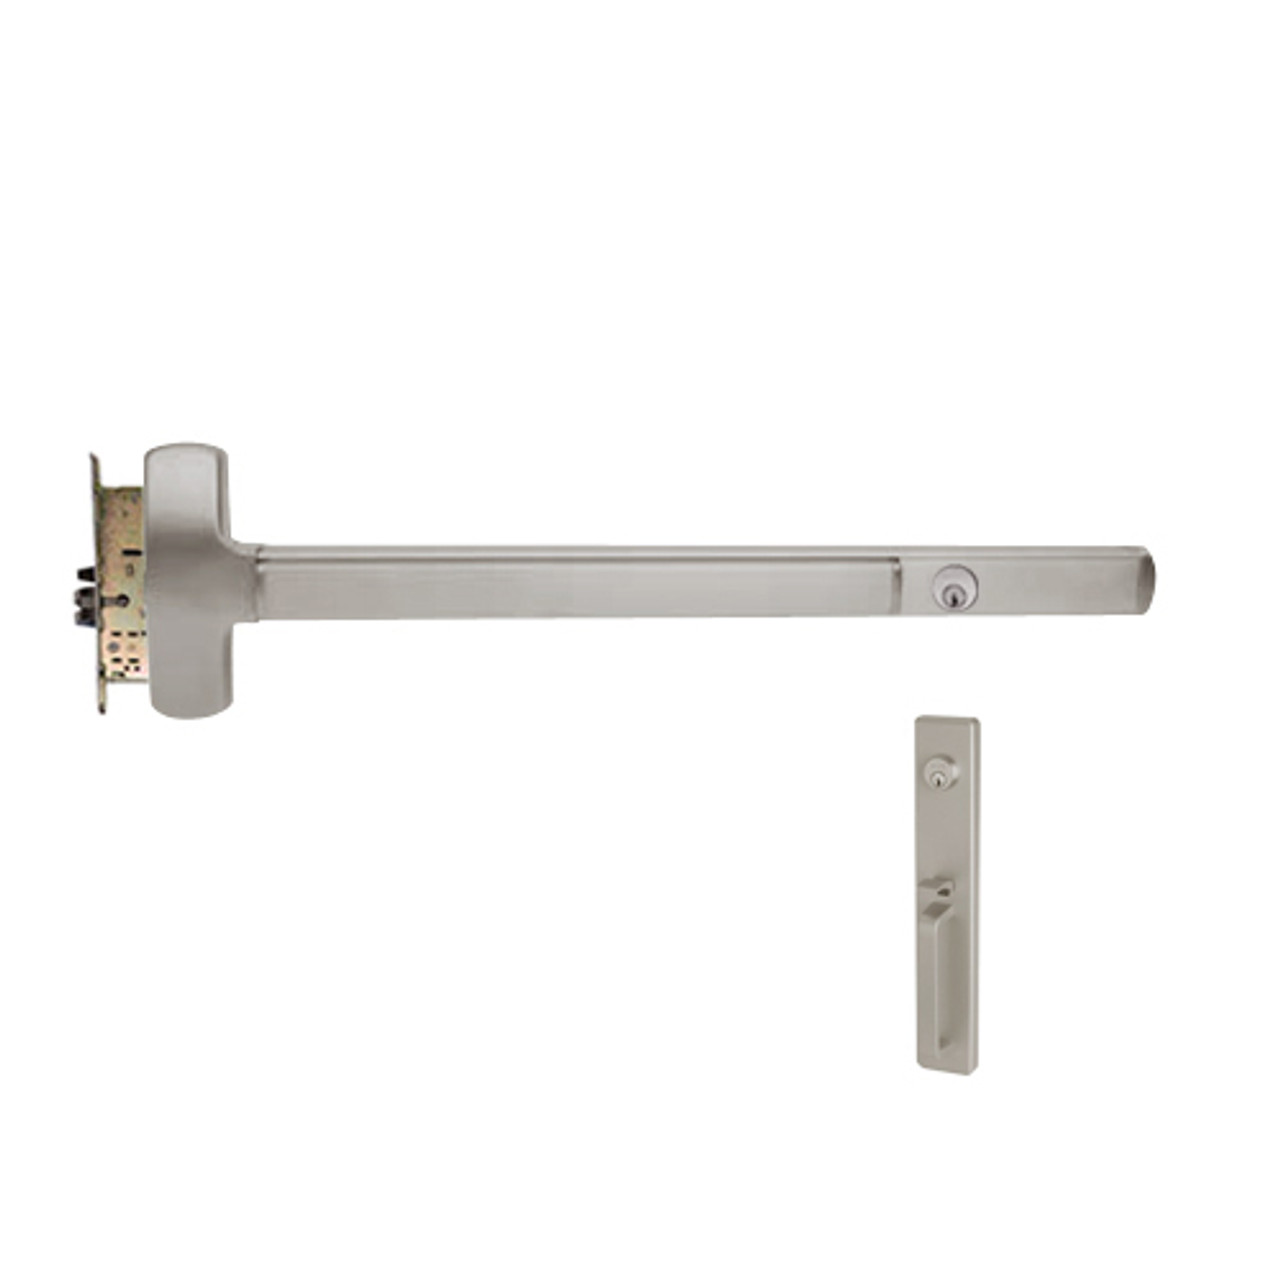 CD25-M-TP-US32D-3-LHR Falcon Exit Device in Satin Stainless Steel